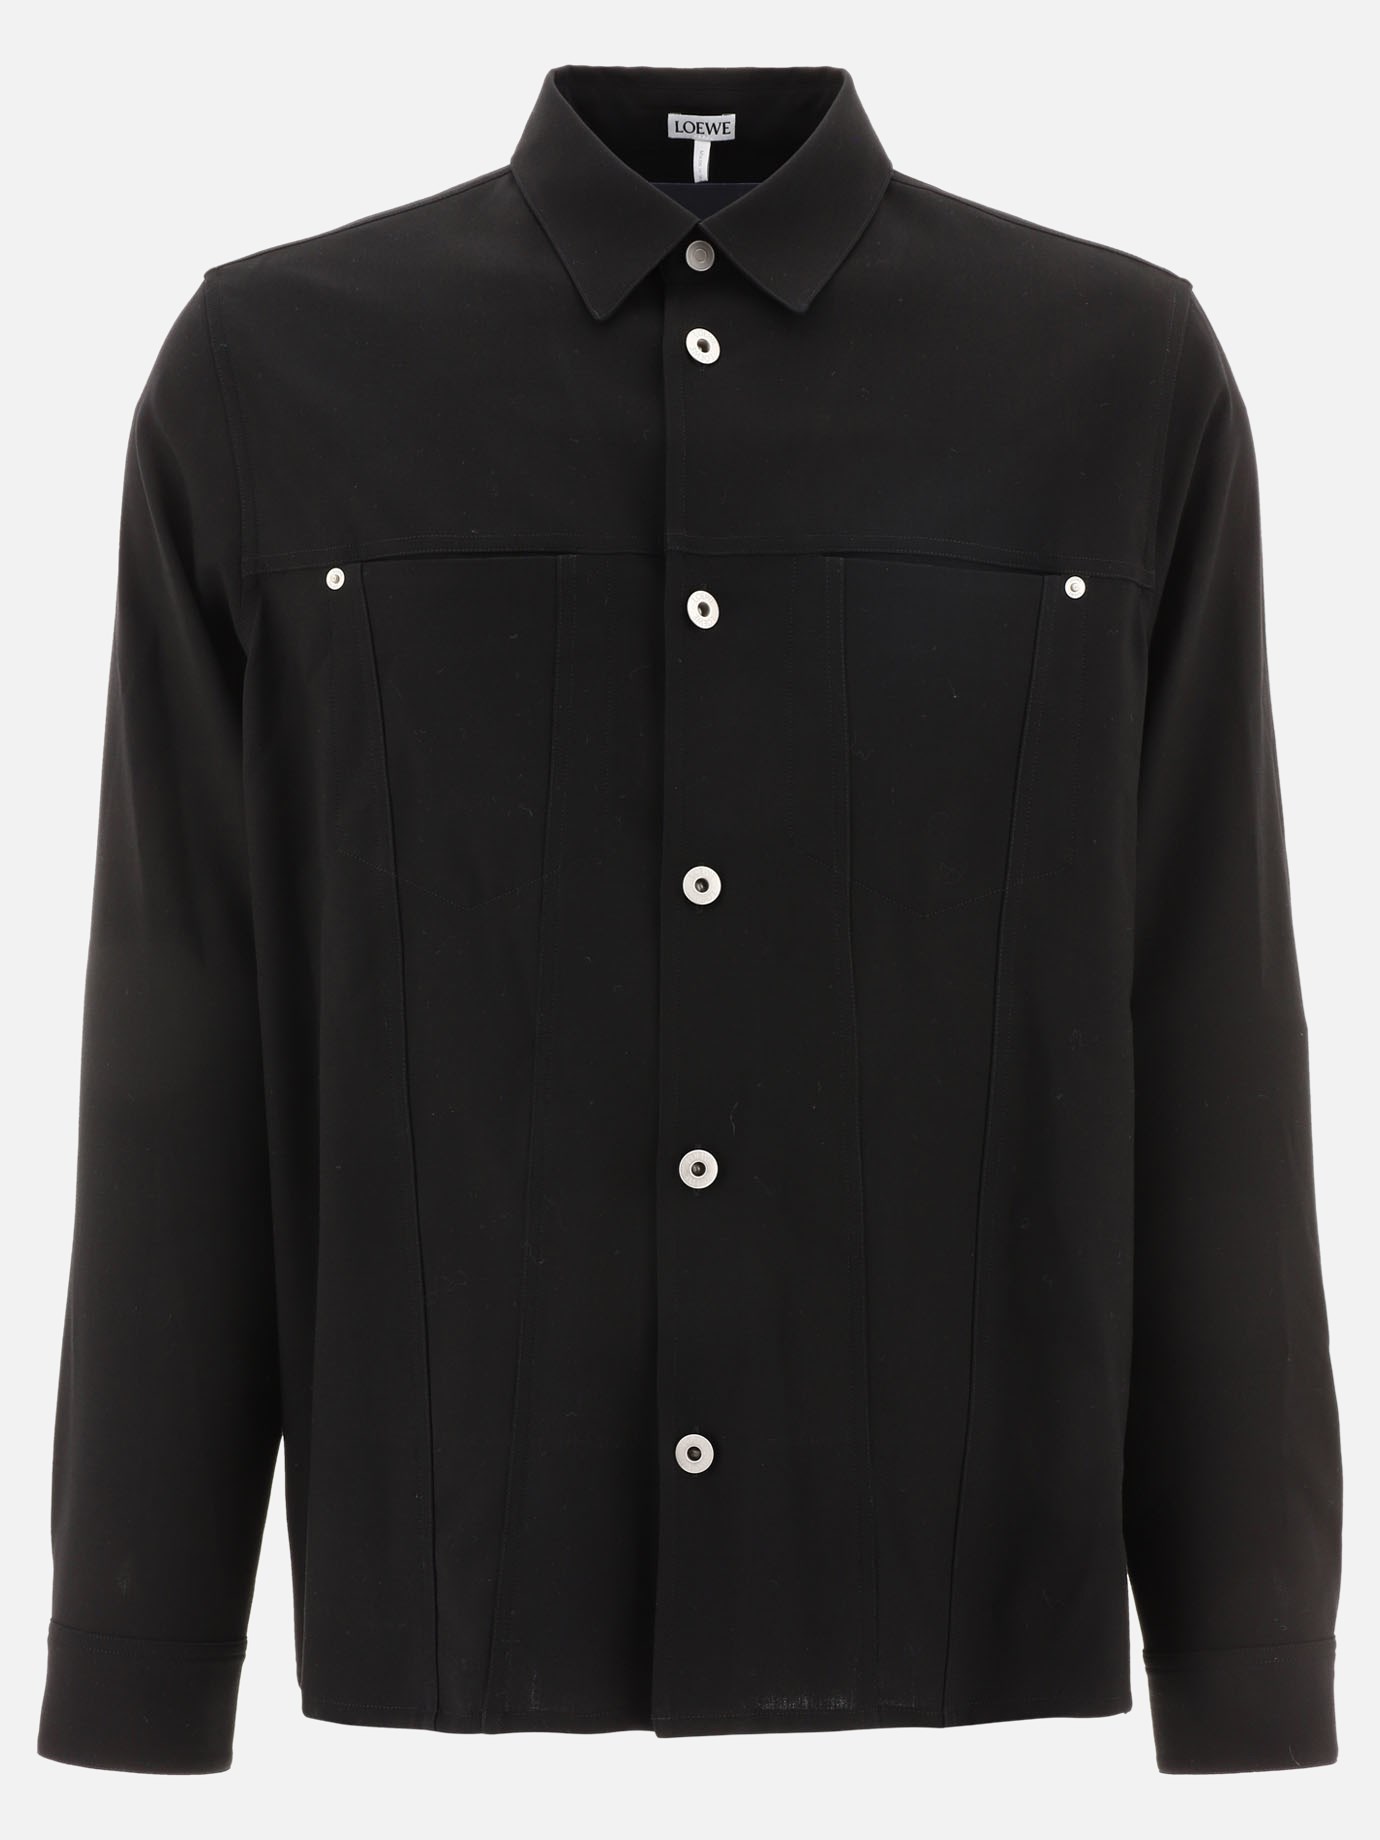 Overshirt with metal buttons